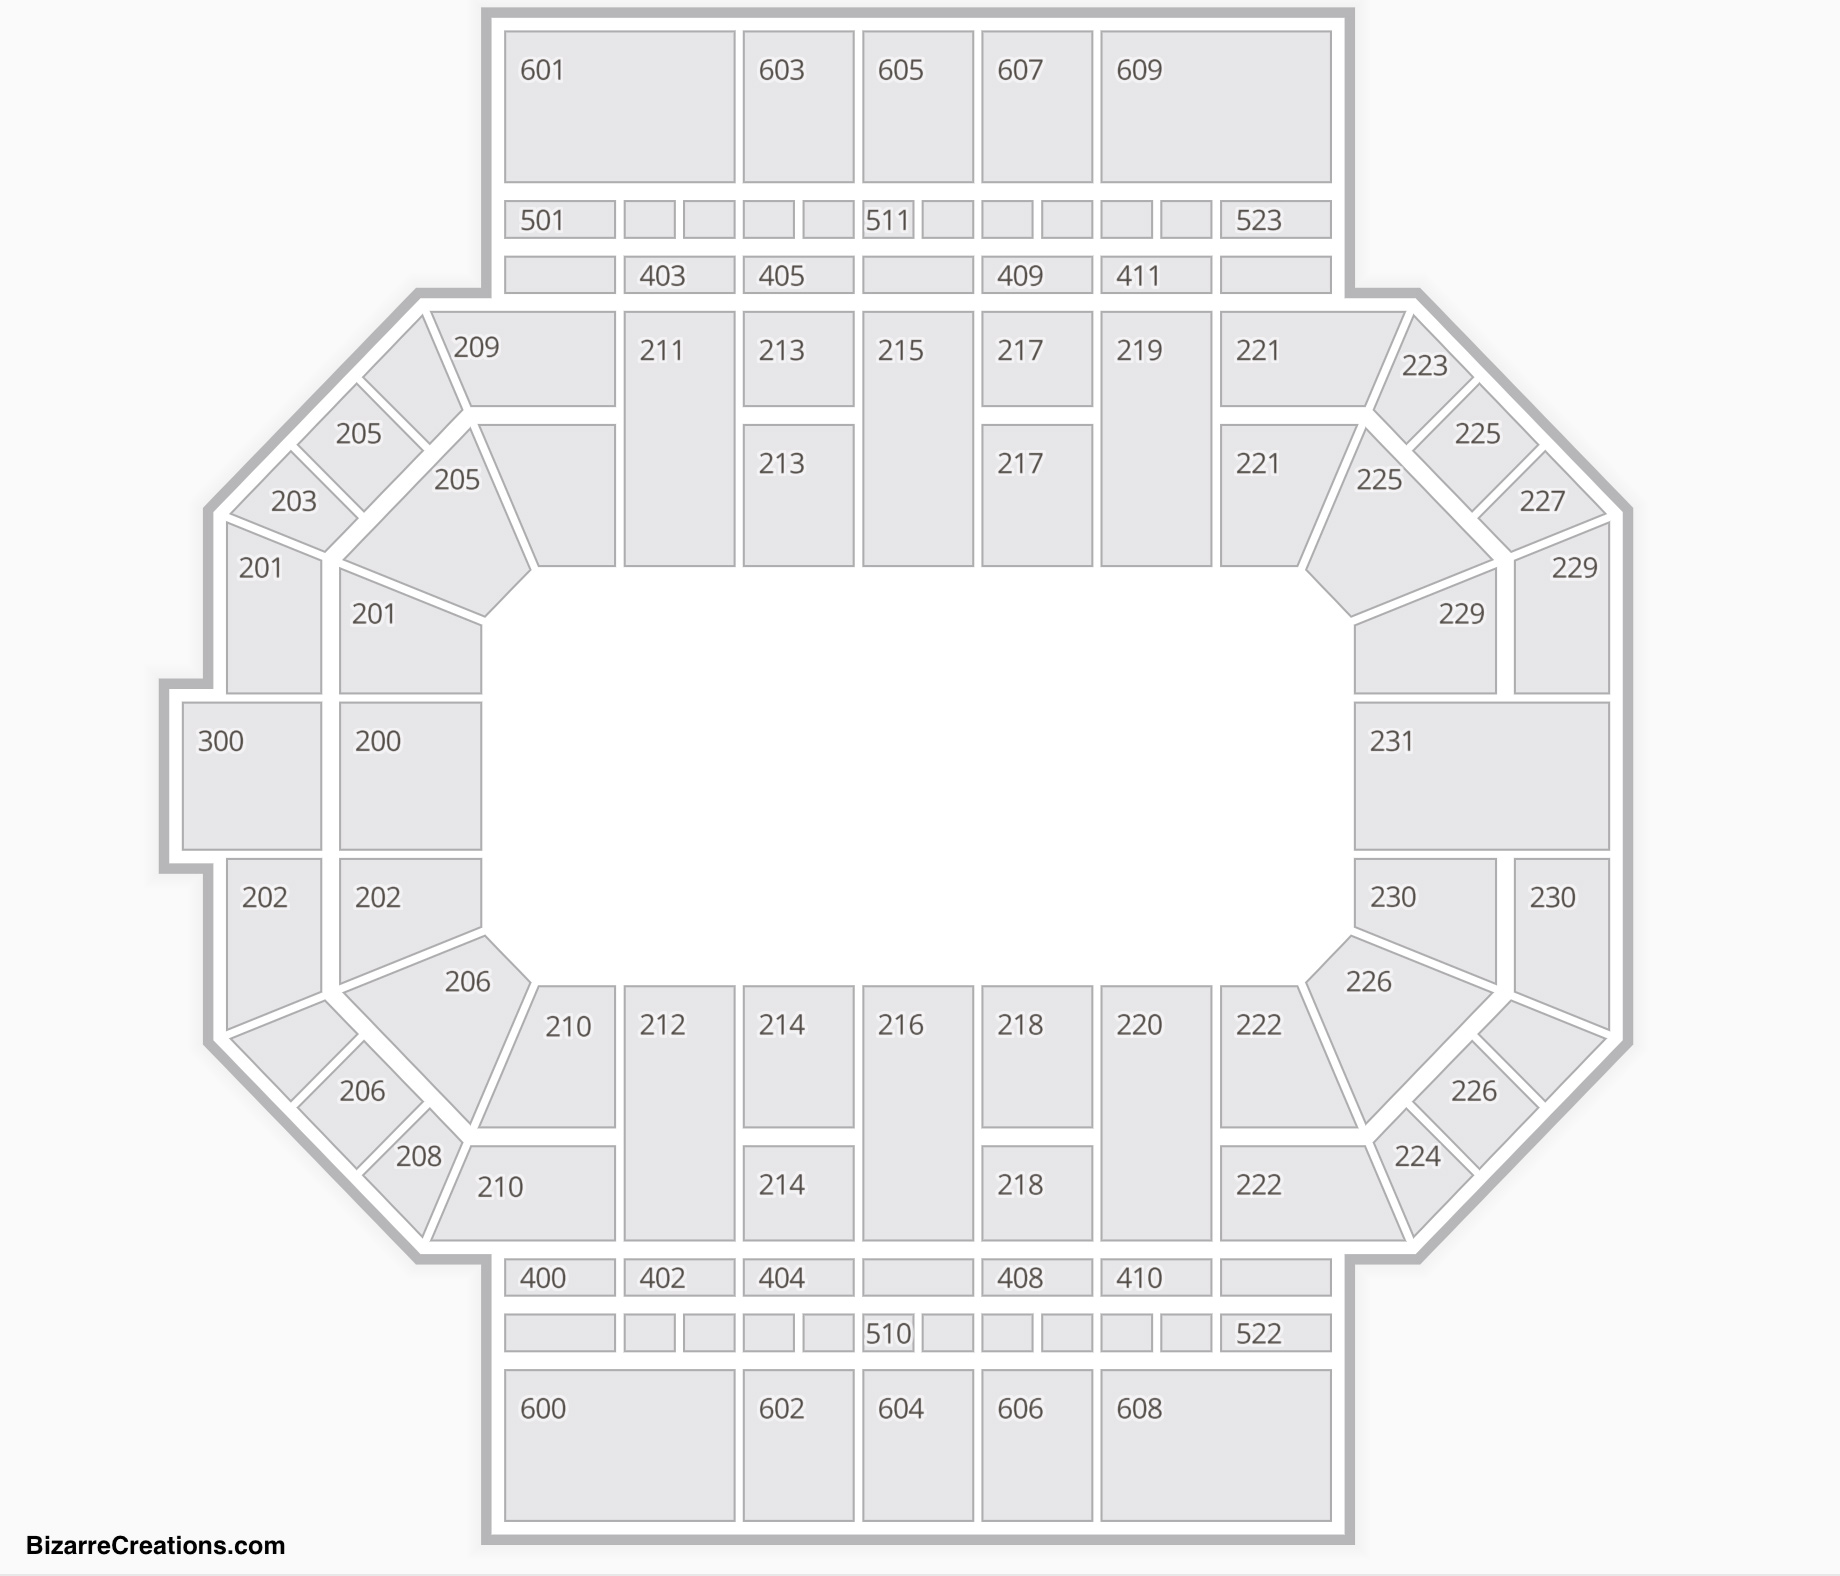 Allen County War Memorial Coliseum Seating Chart Seating Charts And Tickets